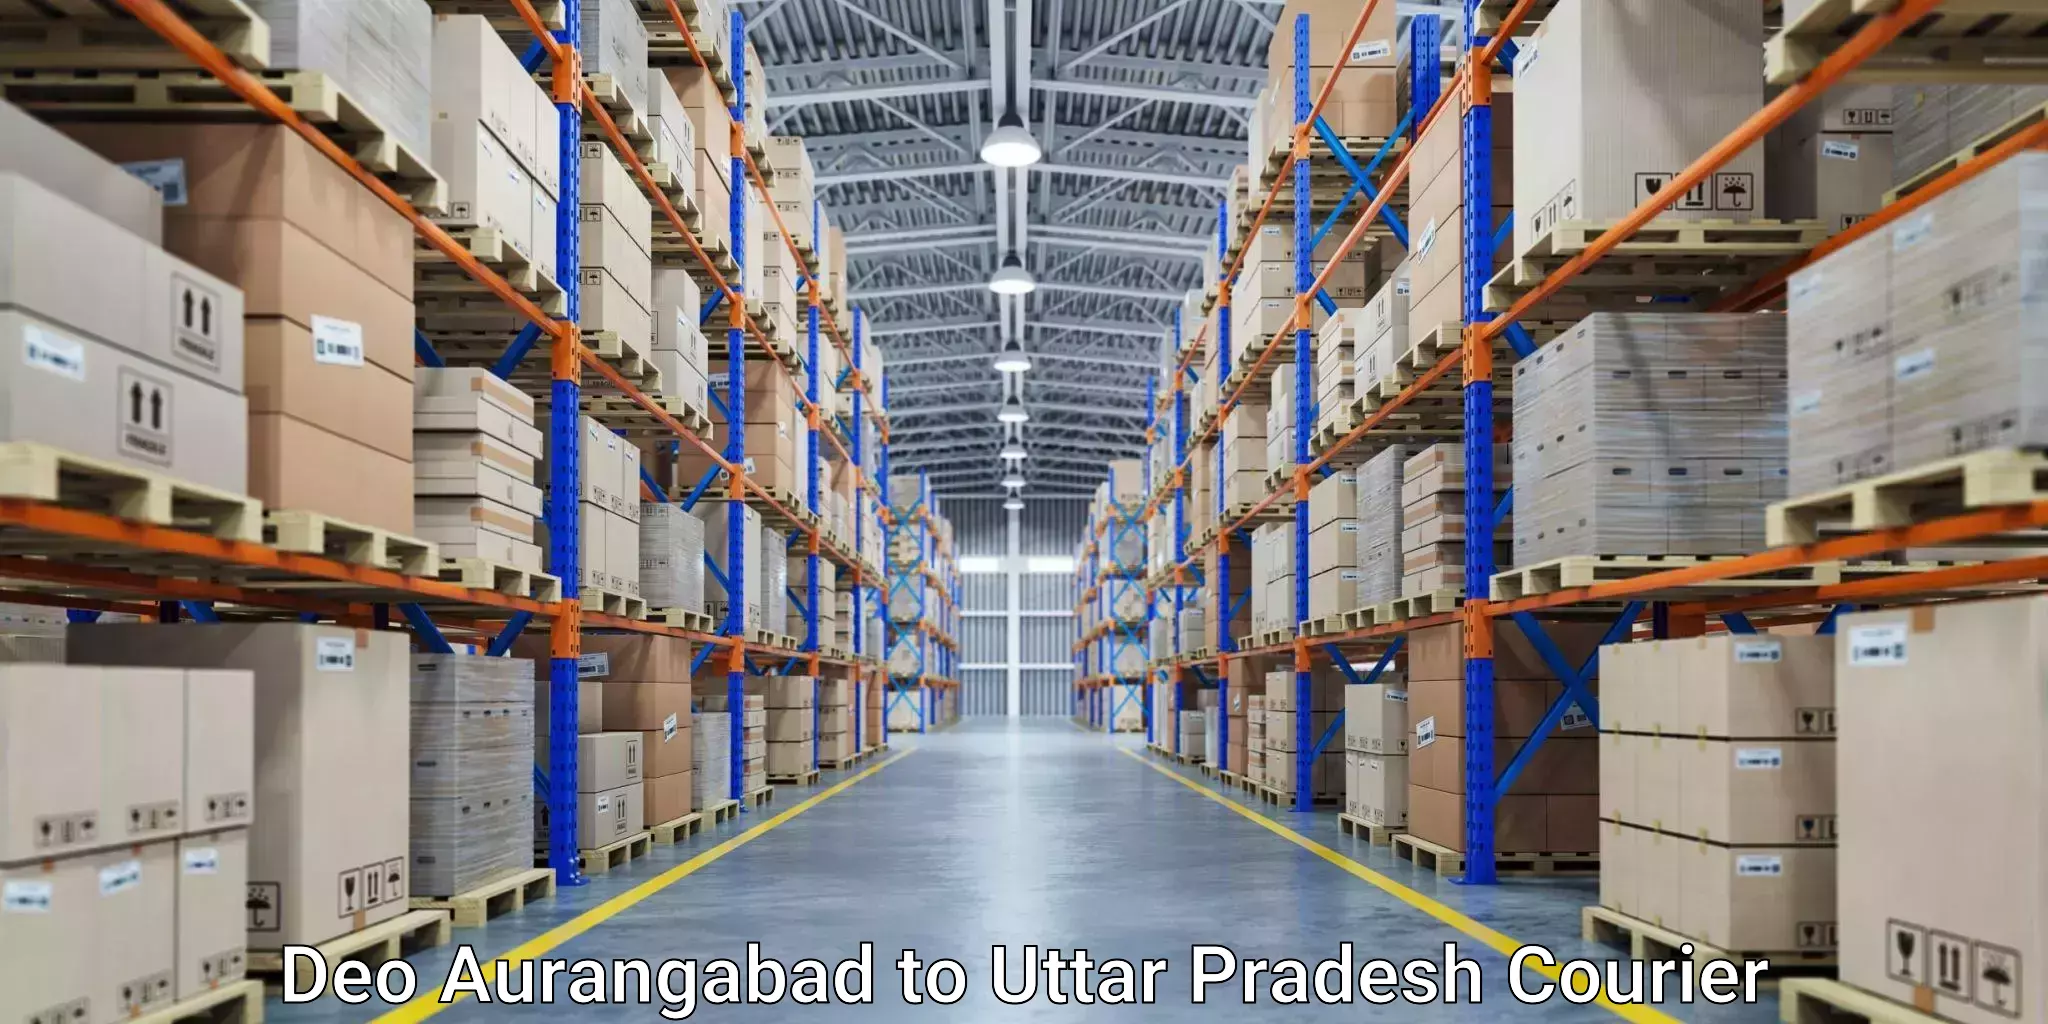 Small business couriers Deo Aurangabad to Gopiganj